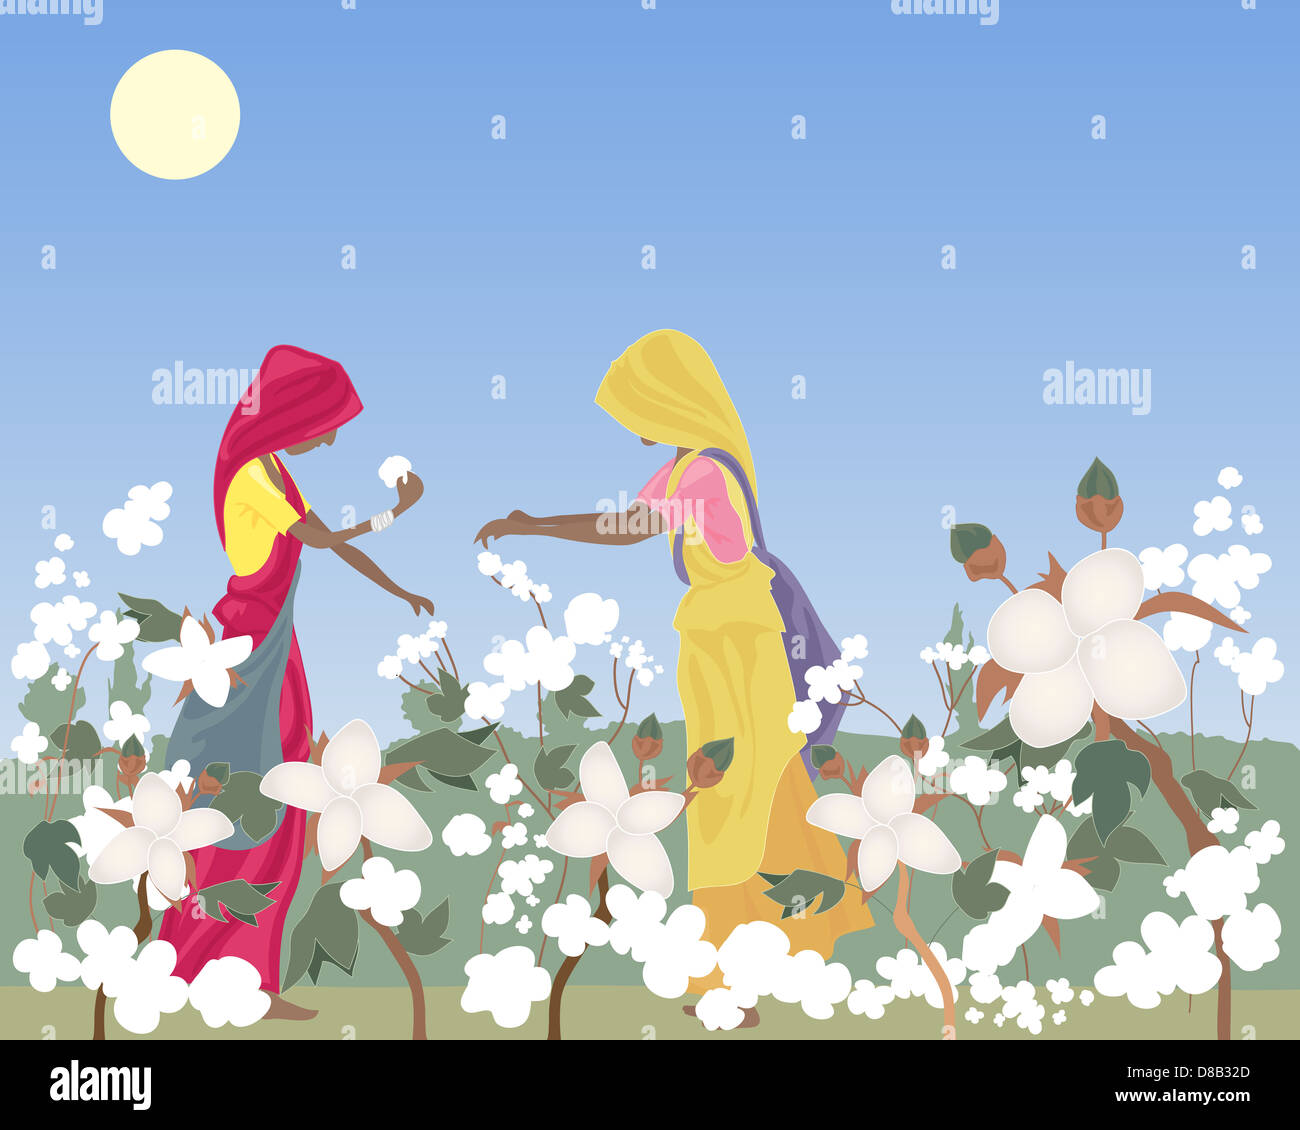 an illustration of two traditionally dressed women laborers in India picking cotton in a field under a hot sun and blue sky Stock Photo